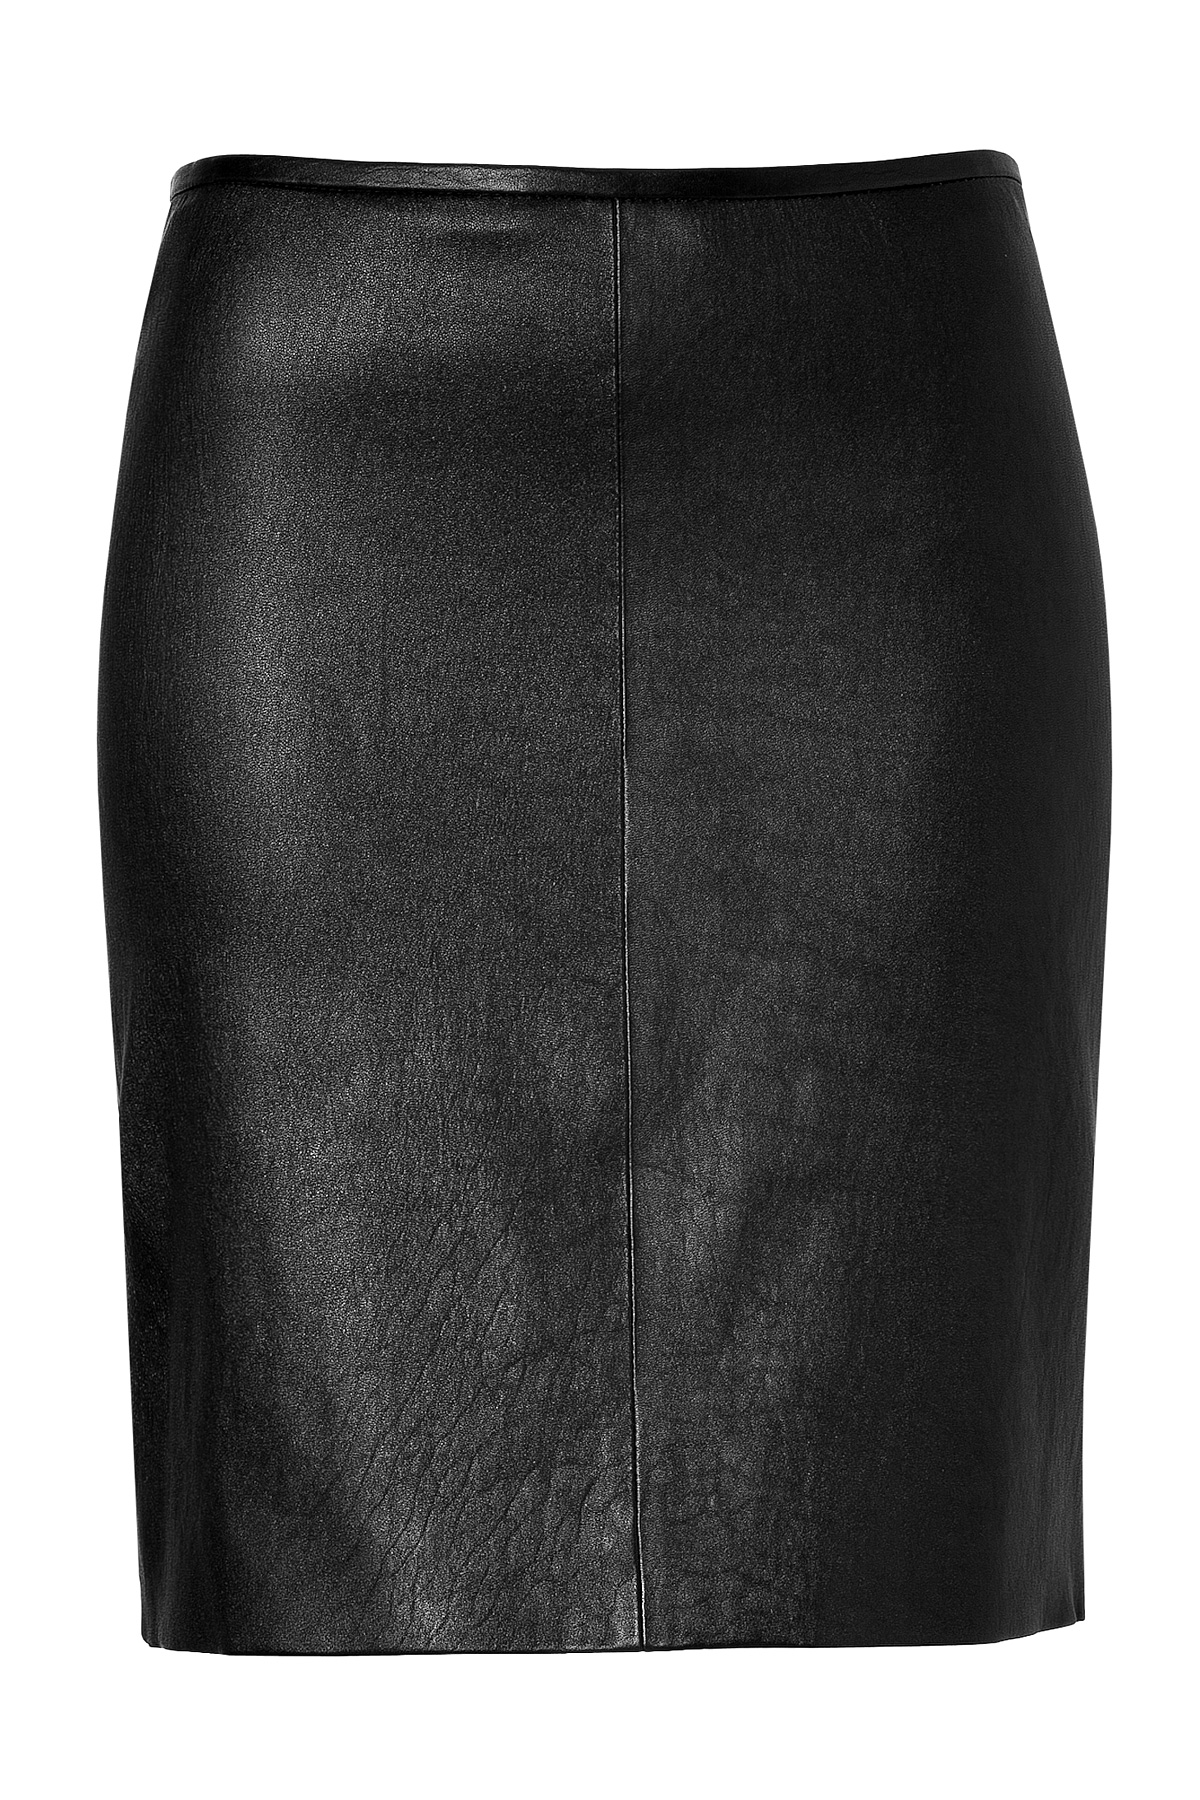 Theory Leather Ferisa Skirt in Black | Lyst